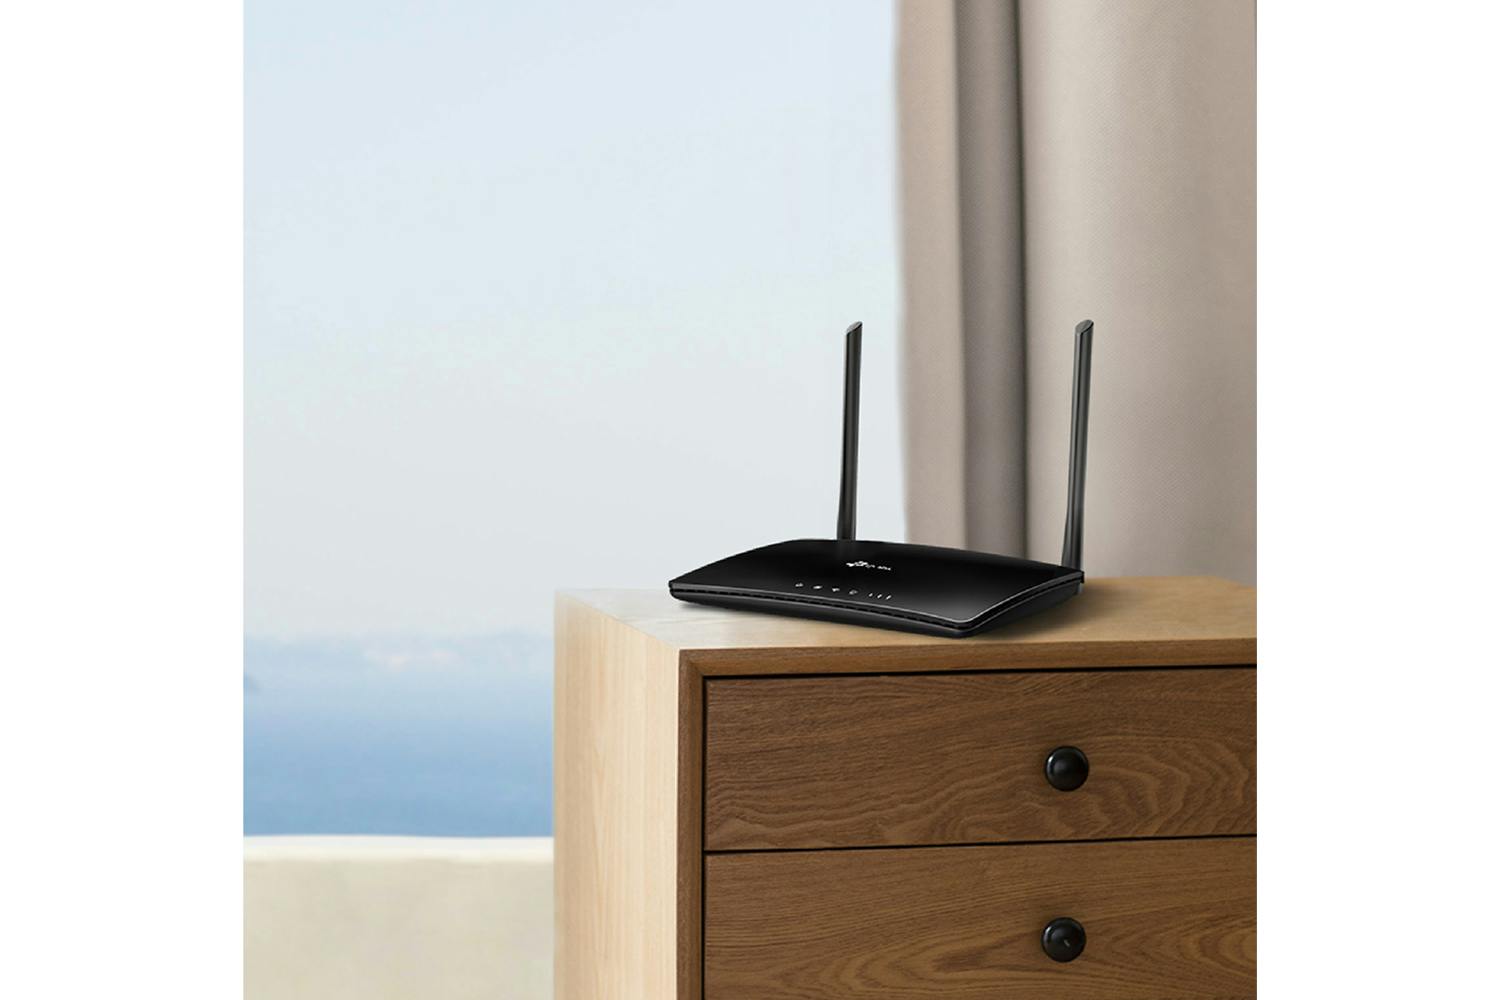 TP-Link N300 Wireless 4G LTE Router